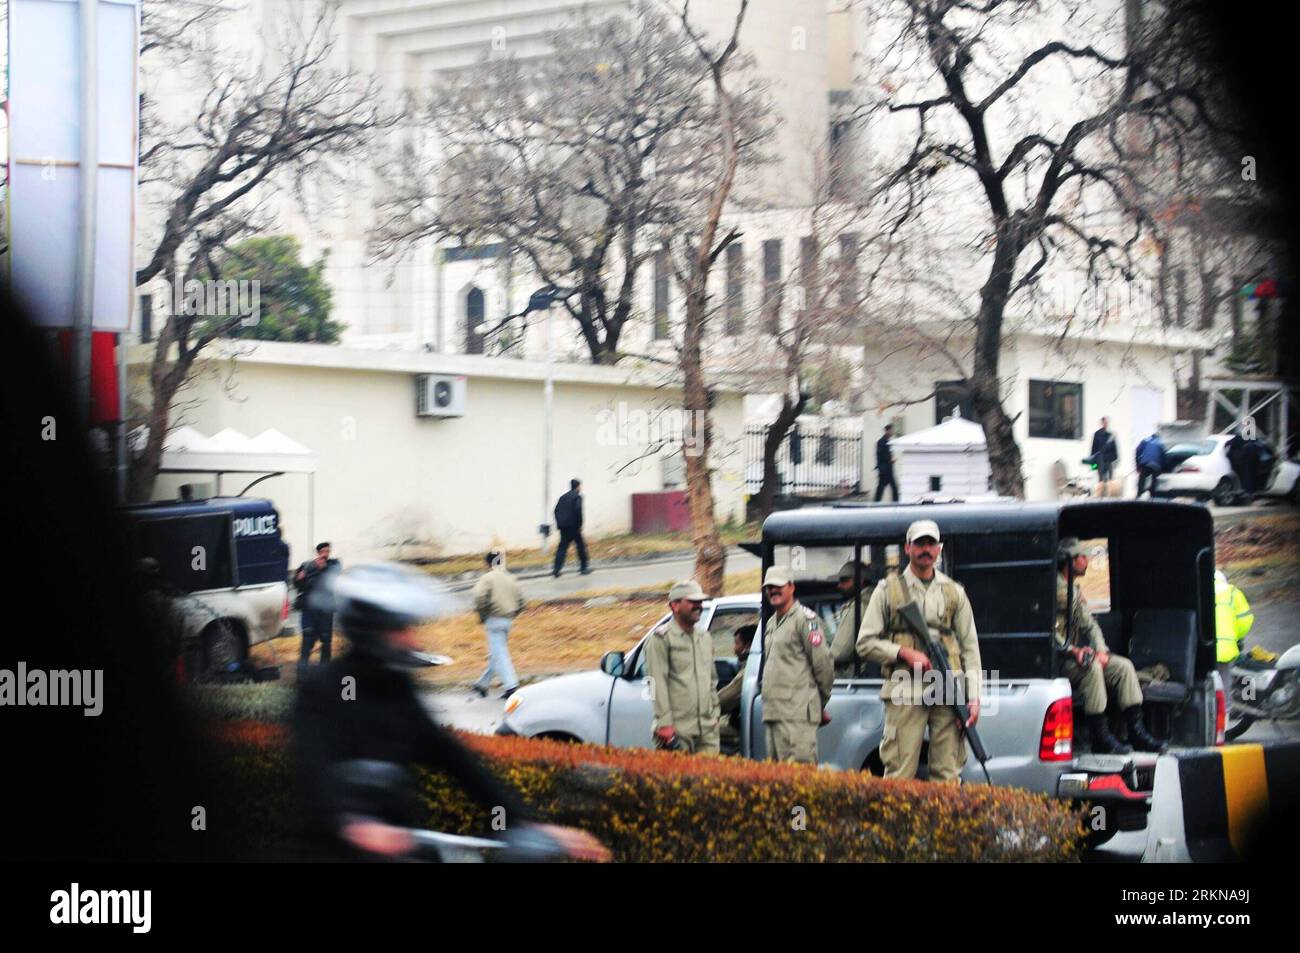 Bildnummer: 57063150  Datum: 13.02.2012  Copyright: imago/Xinhua (120213) -- ISLAMABAD, Feb. 13, 2012 (Xinhua) -- Pakistani paramilitary soldiers stand guard outside the Supreme Court building in Islamabad, capital of Pakistan on Feb. 13, 2012. Security is at high alert before Pakistani Prime Minister s hearing in Supreme Court. Supreme Court of Pakistan has charge sheeted Pakistani Prime Minister Yousuf Raza Gilani as contempt of court on Monday for not complying court s orders of writing a letter to the Swiss courts against Pakistani President Asif Ali Zardari. (Xinhua/Ahmad Kamal) PAKISTAN- Stock Photo